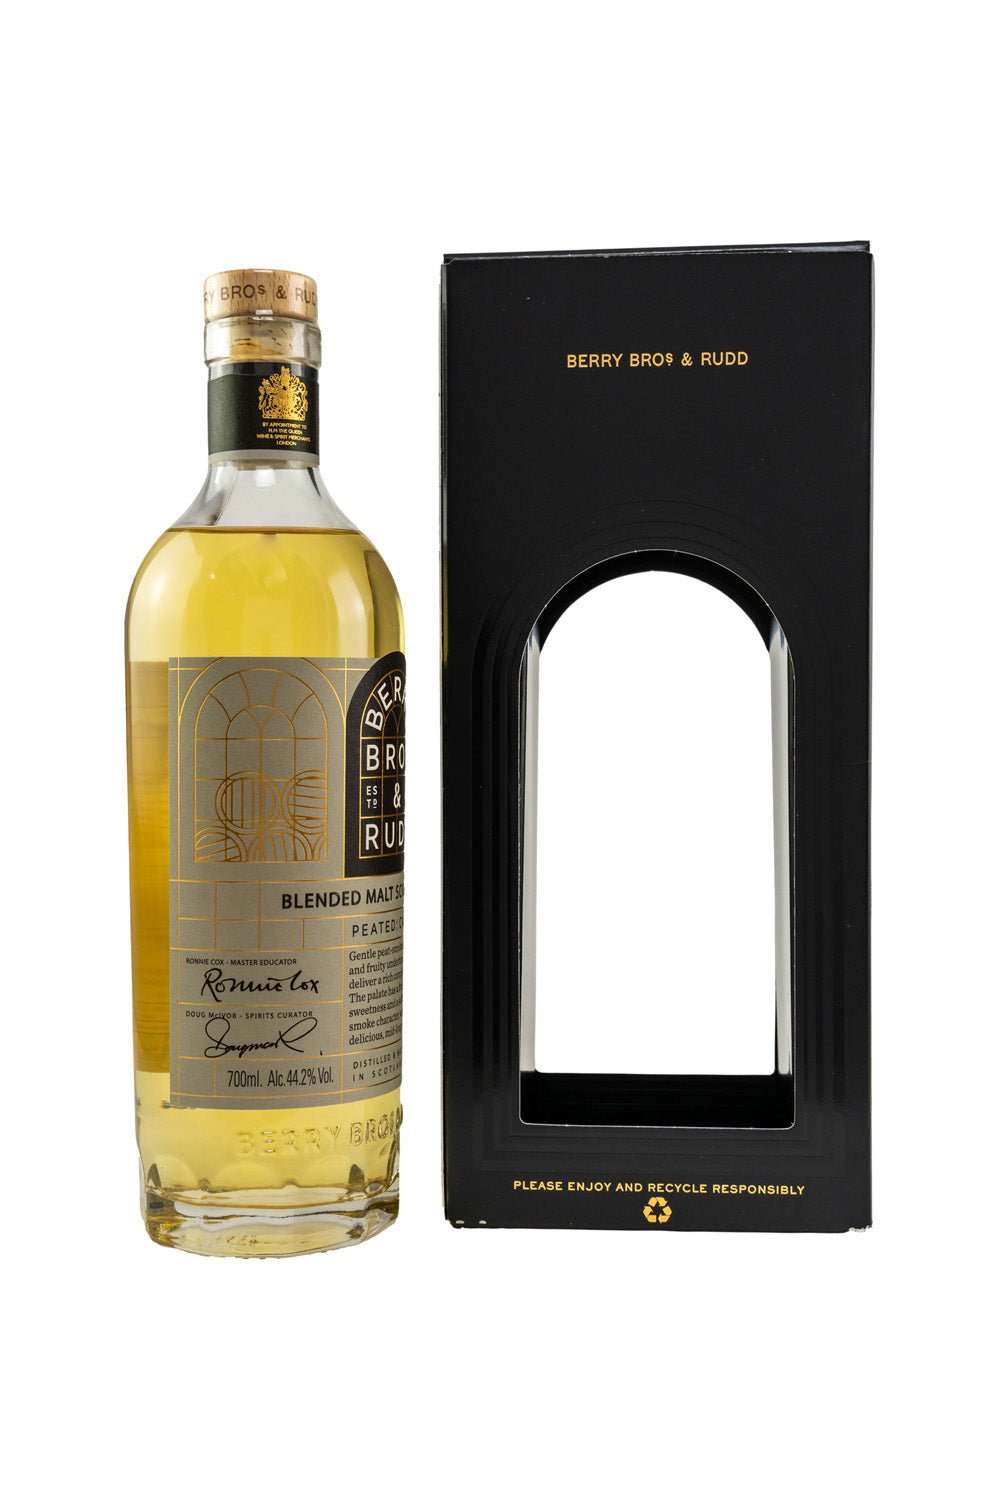 Berry Bros and Rudd Peated Cask Blended Scotch Whisky 44,2% 700ml - Maltimore